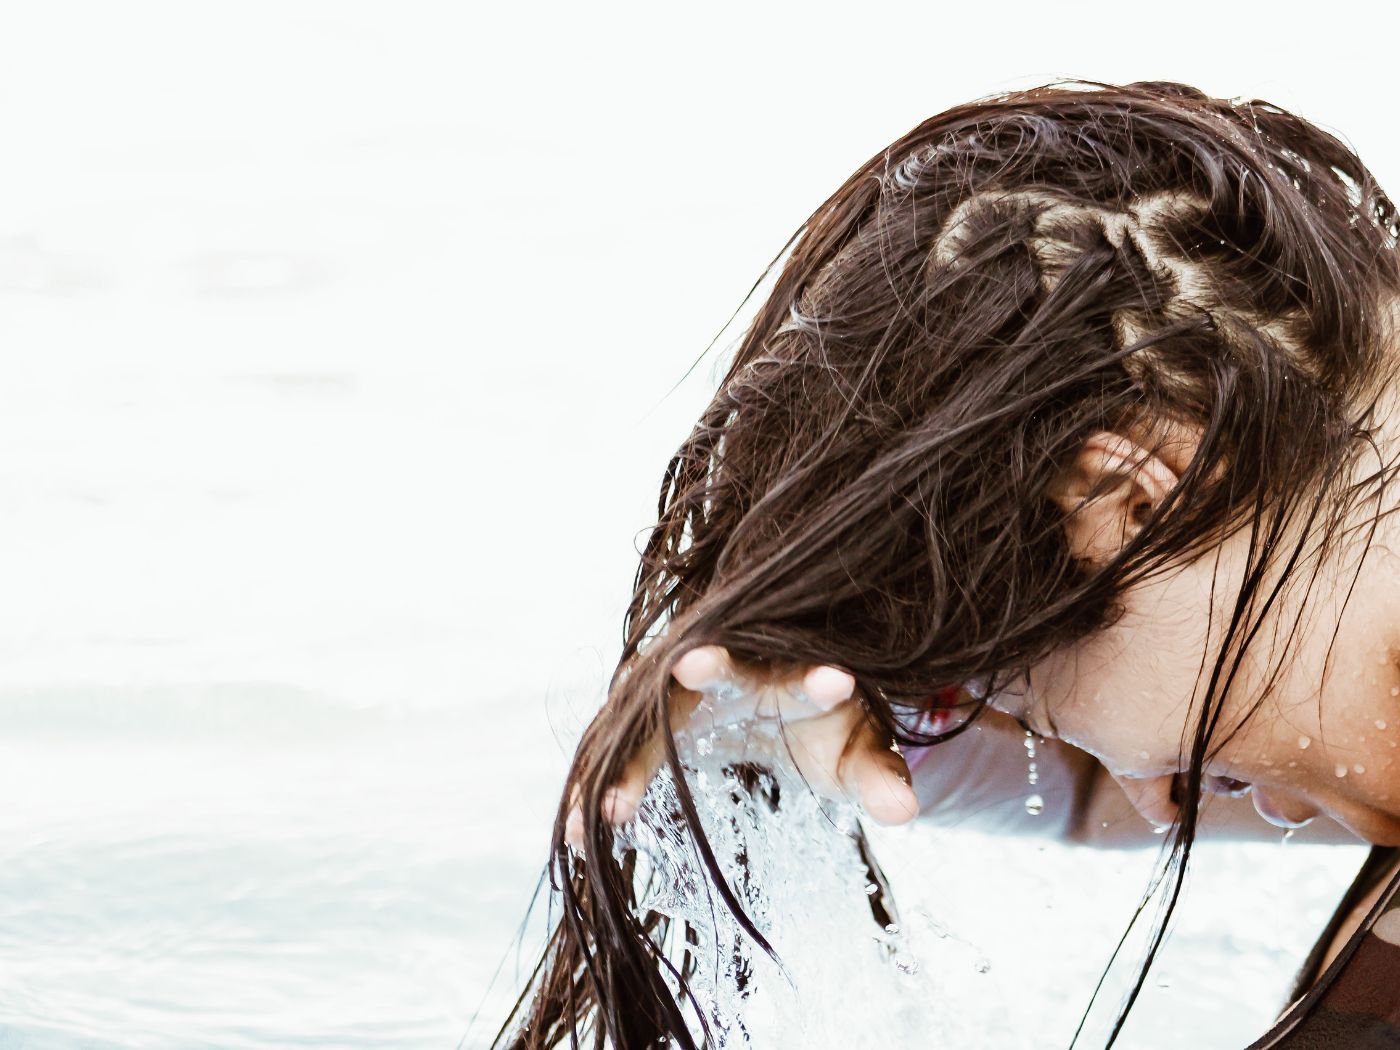 Woman rinsing her hair and scalp in the ocean